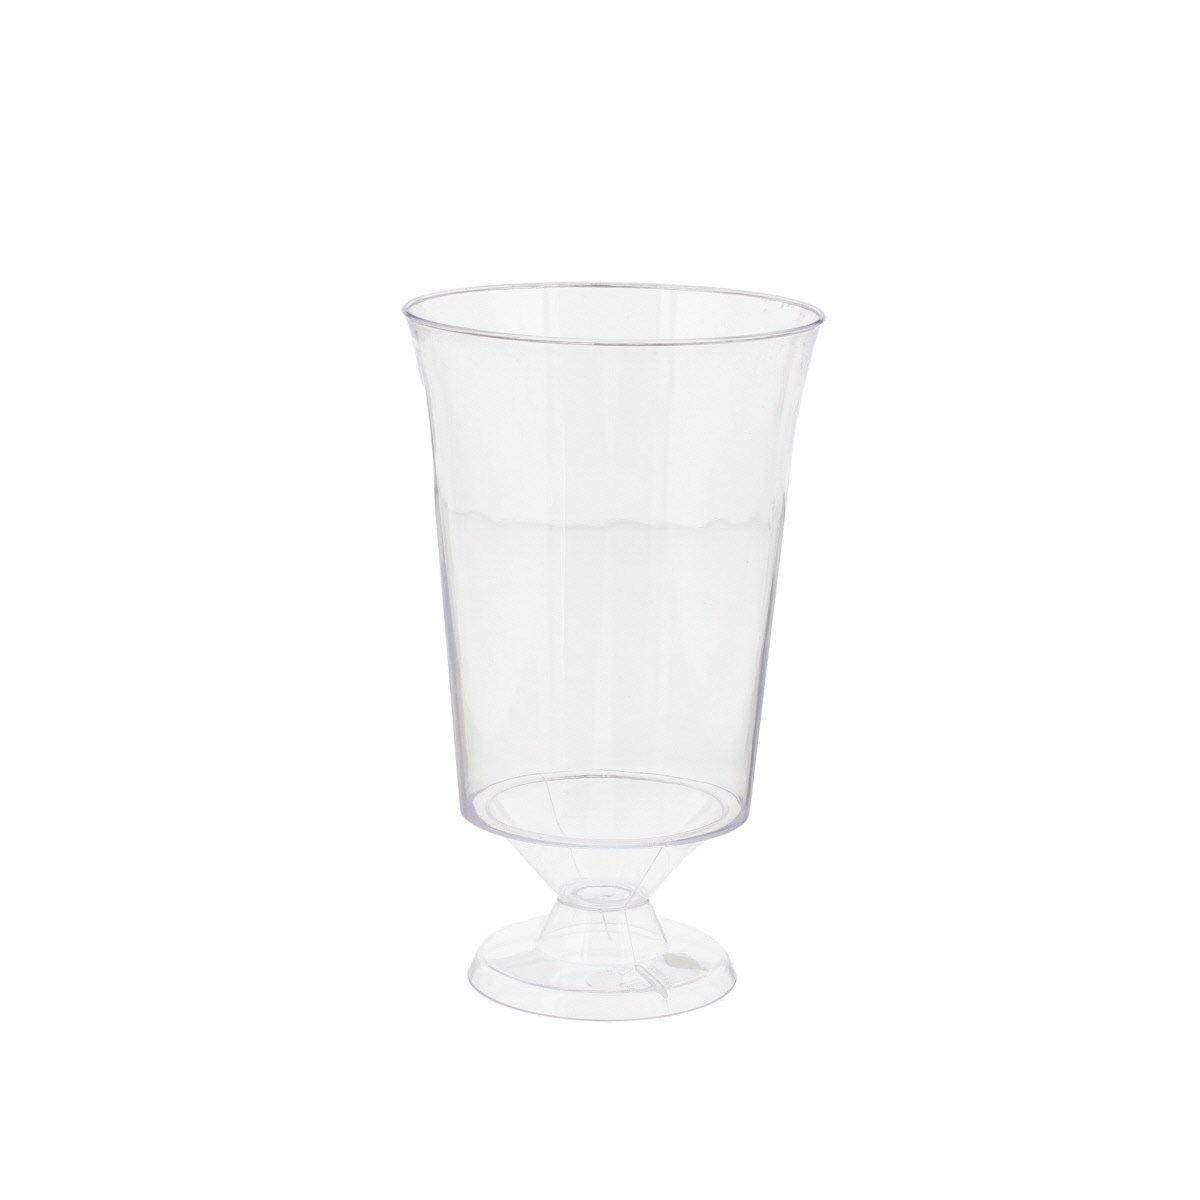 175ml Disposable Plastic Wine Glasses Fully Recyclable